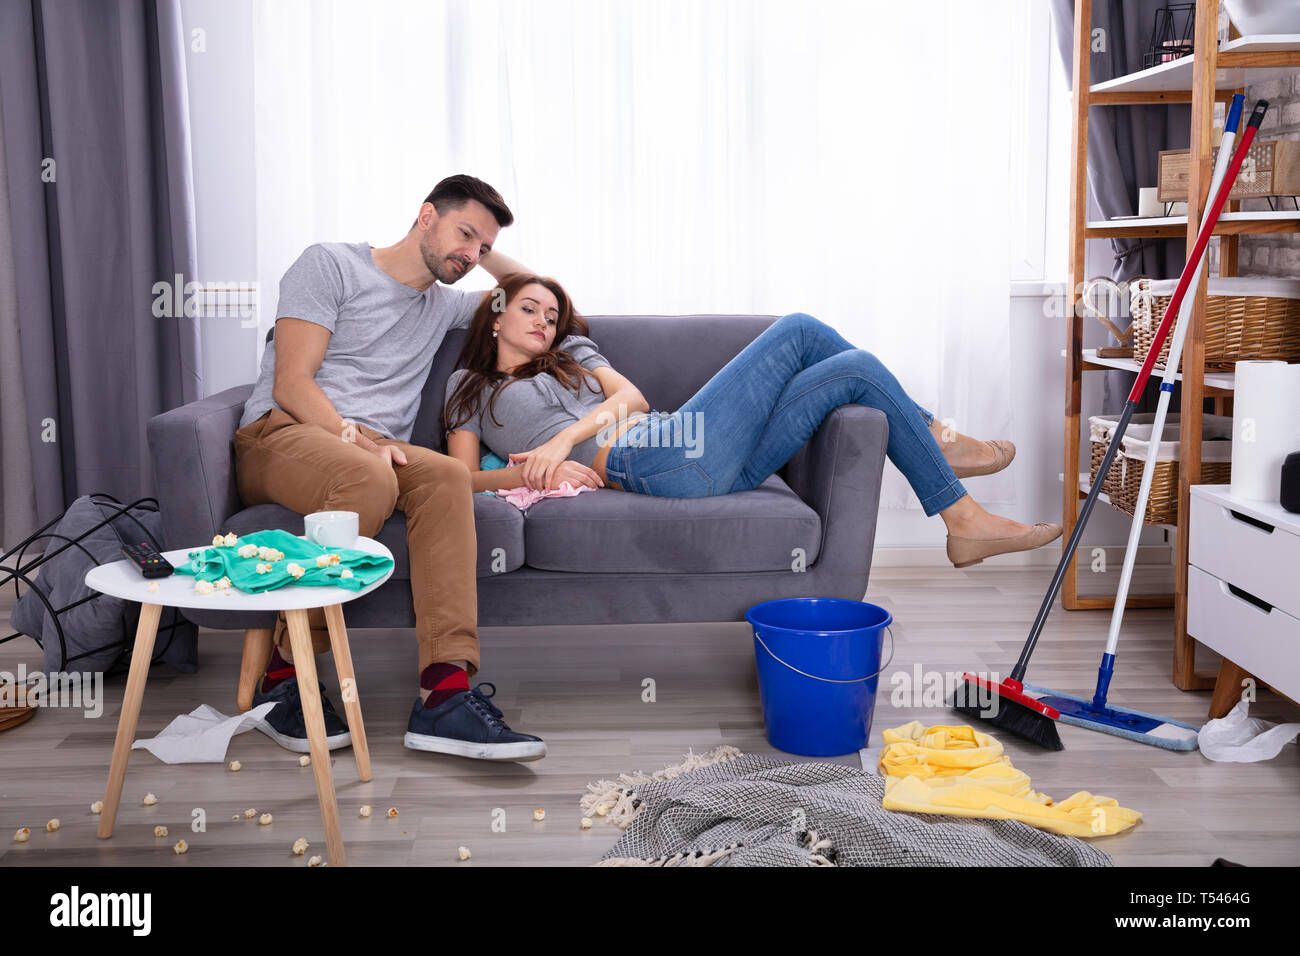 Smiling Couple Relaxing On Sofa In Messy Living Room At Home Stock Photo